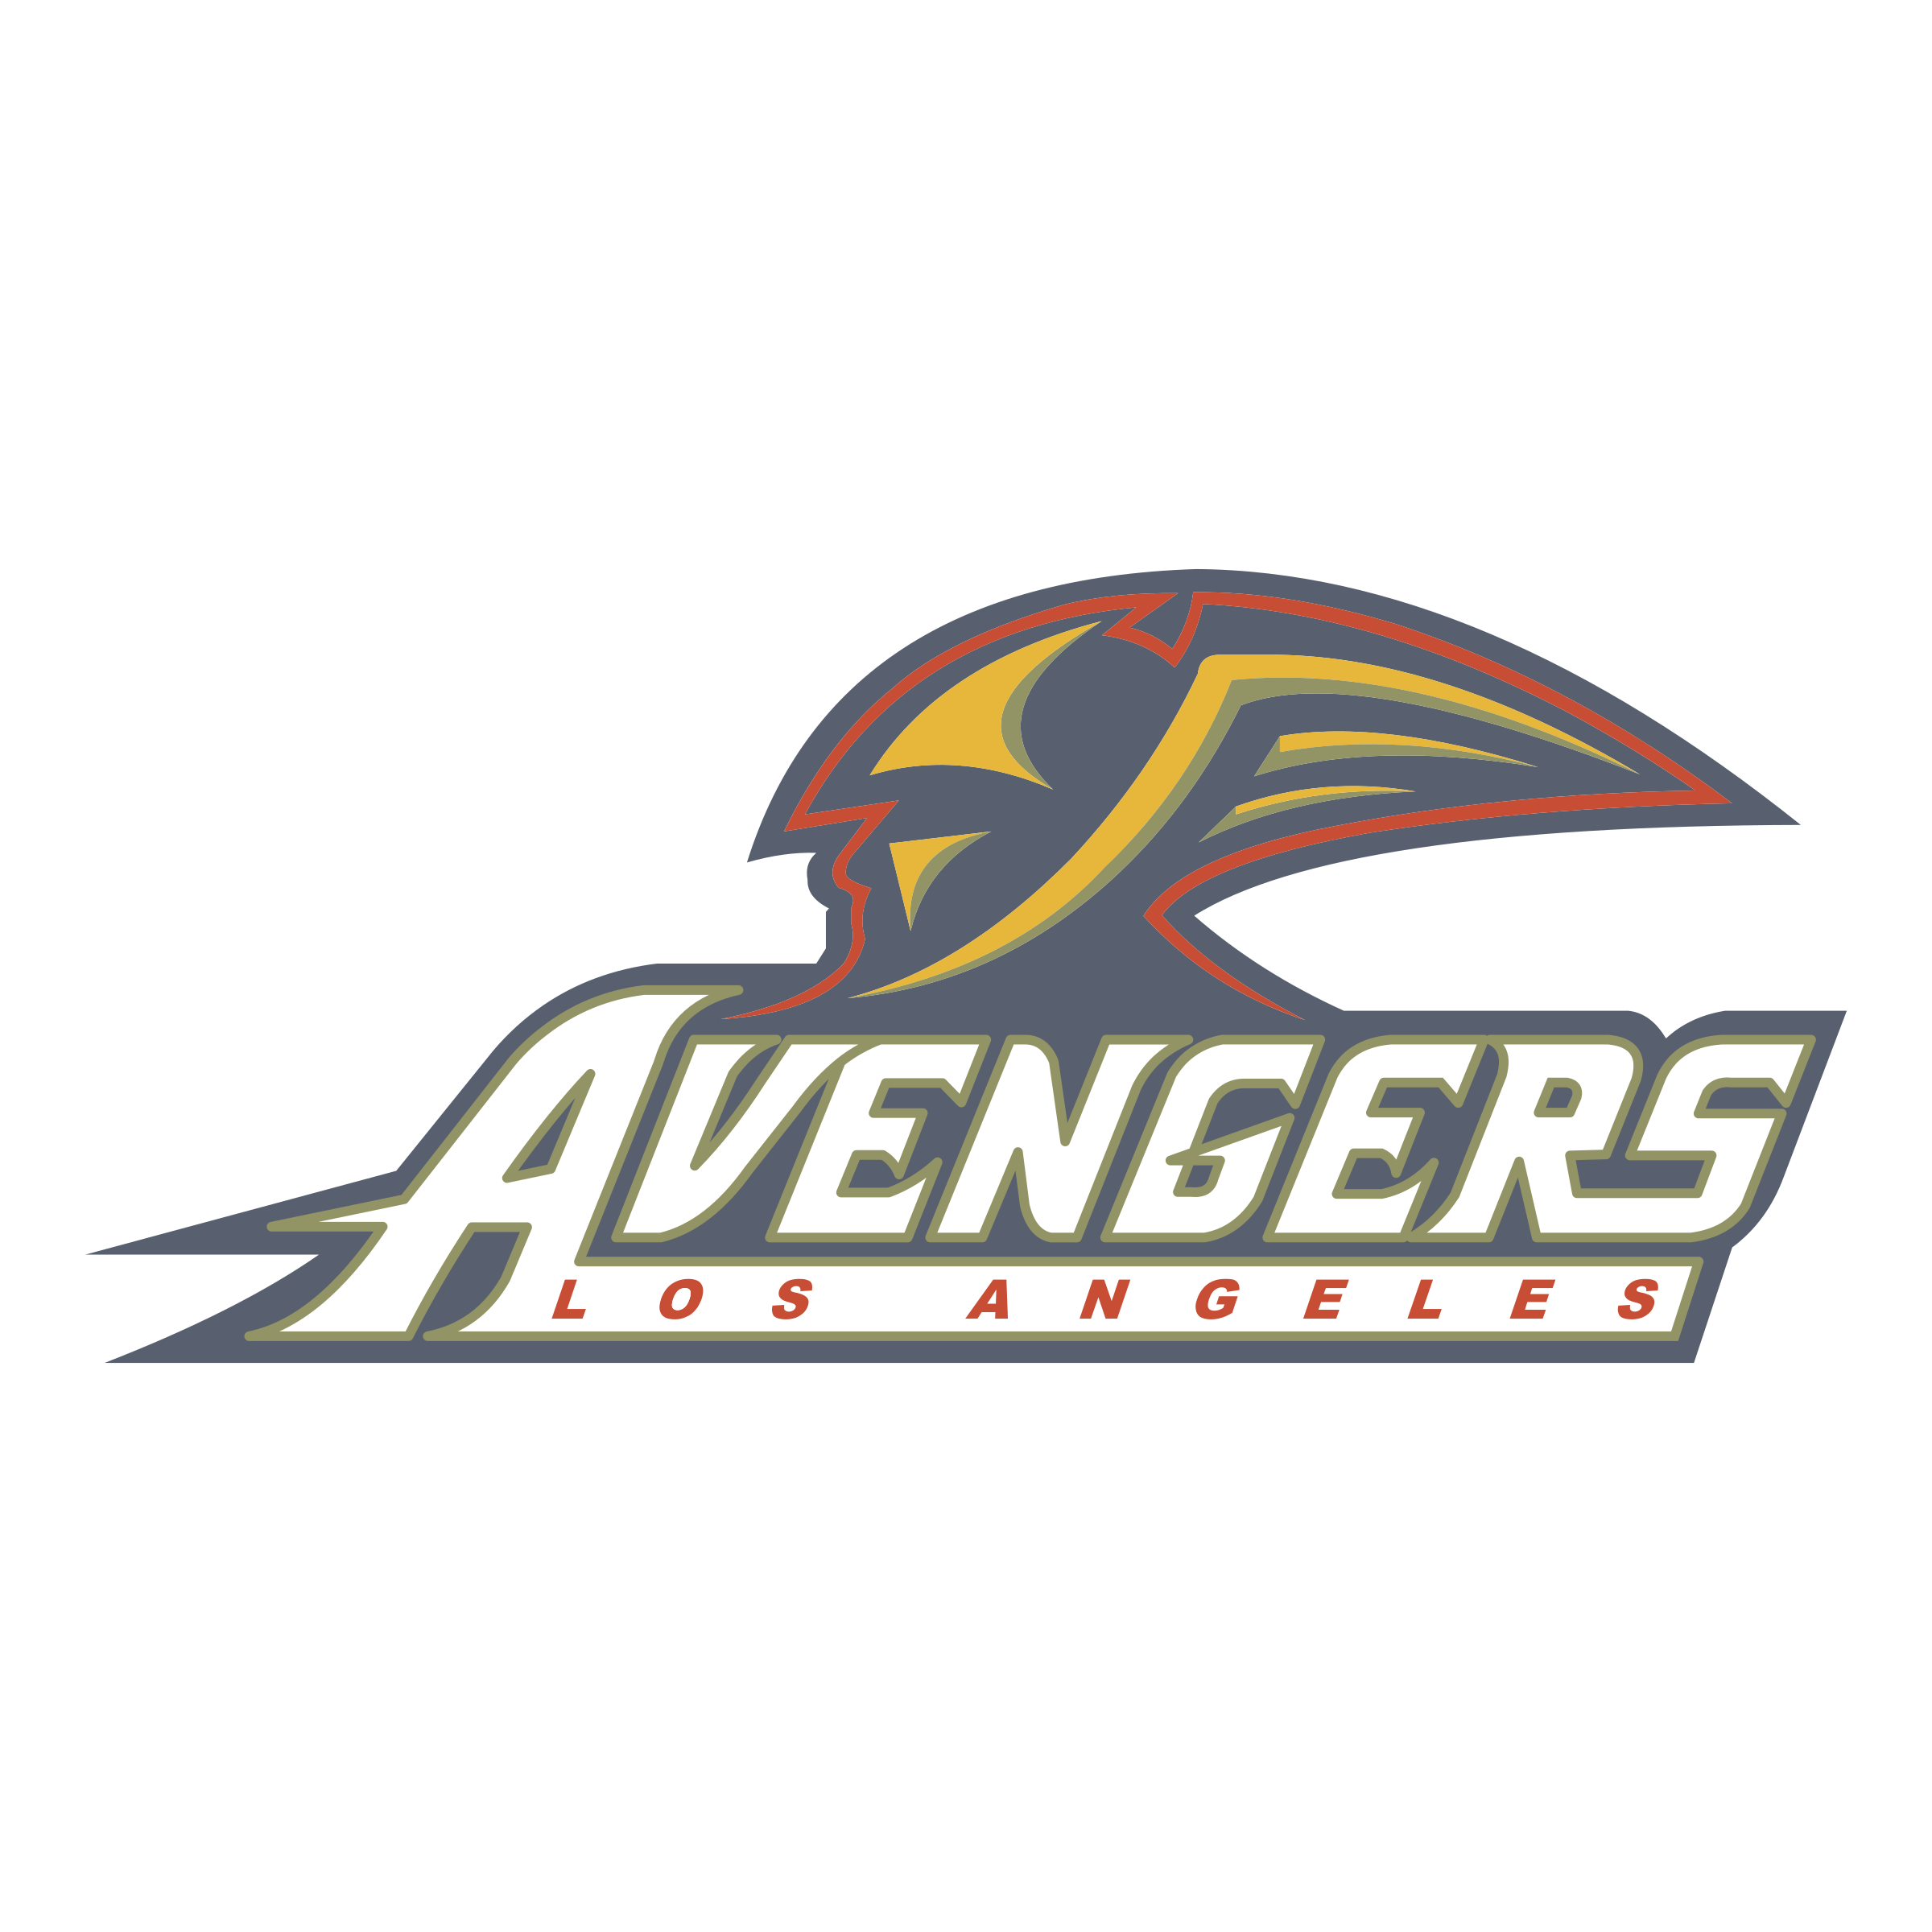 Logo Avengers Free Clipart HQ PNG Image